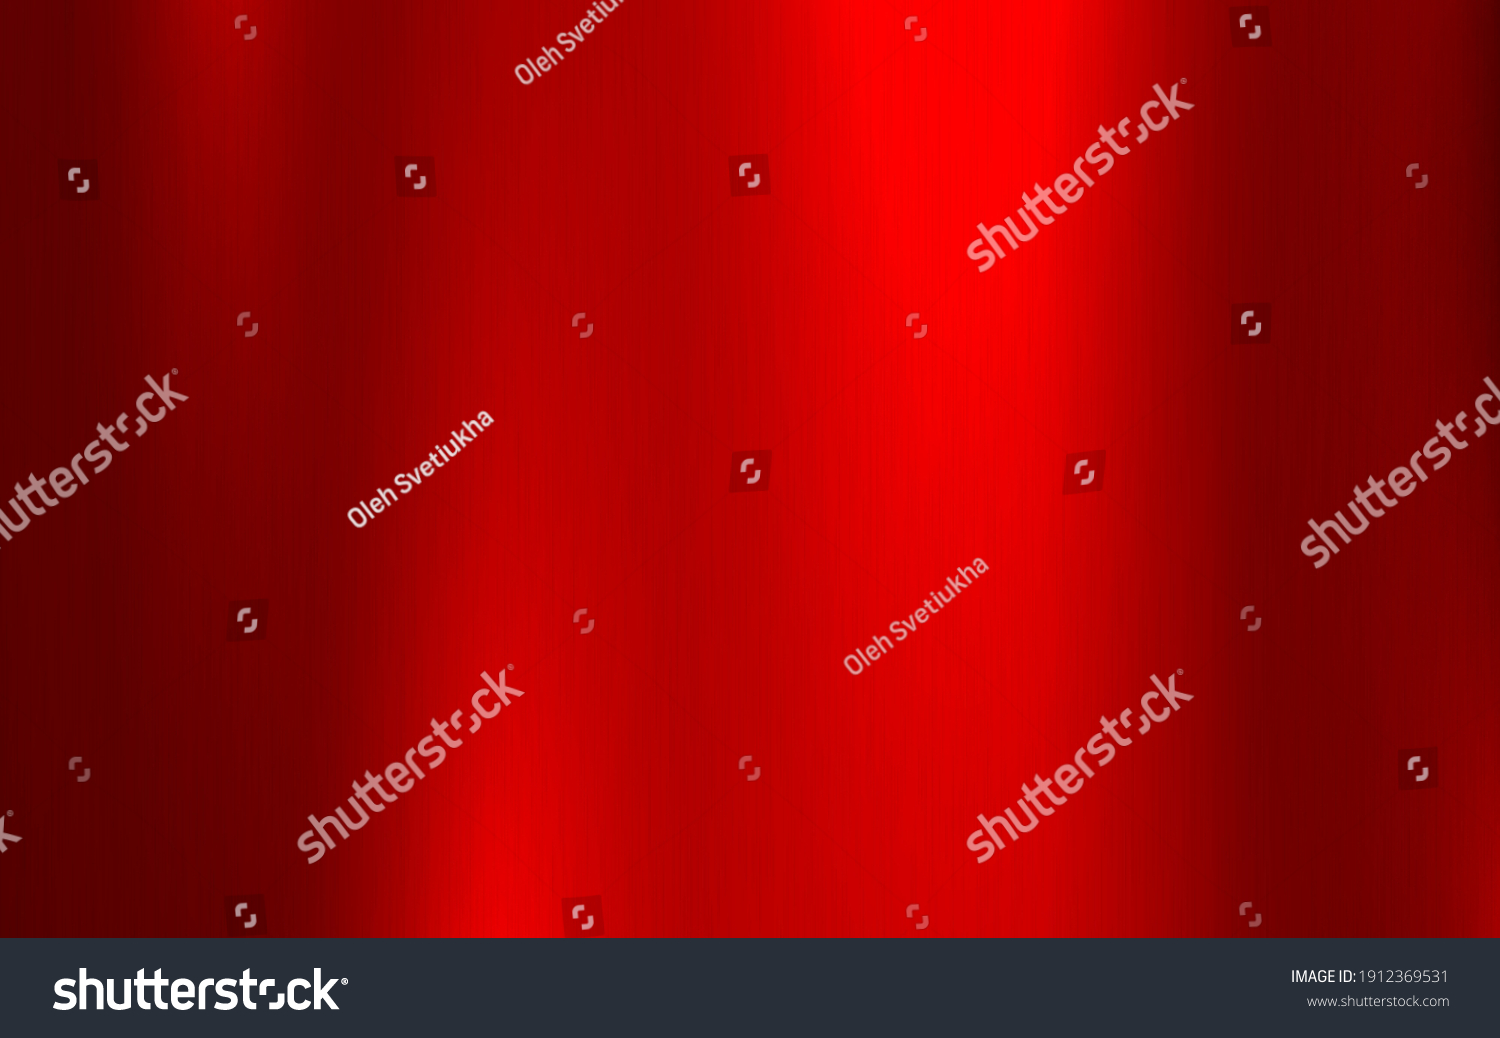 Red metallic radial gradient with scratches. Red foil surface texture effect. Vector illustration. #1912369531